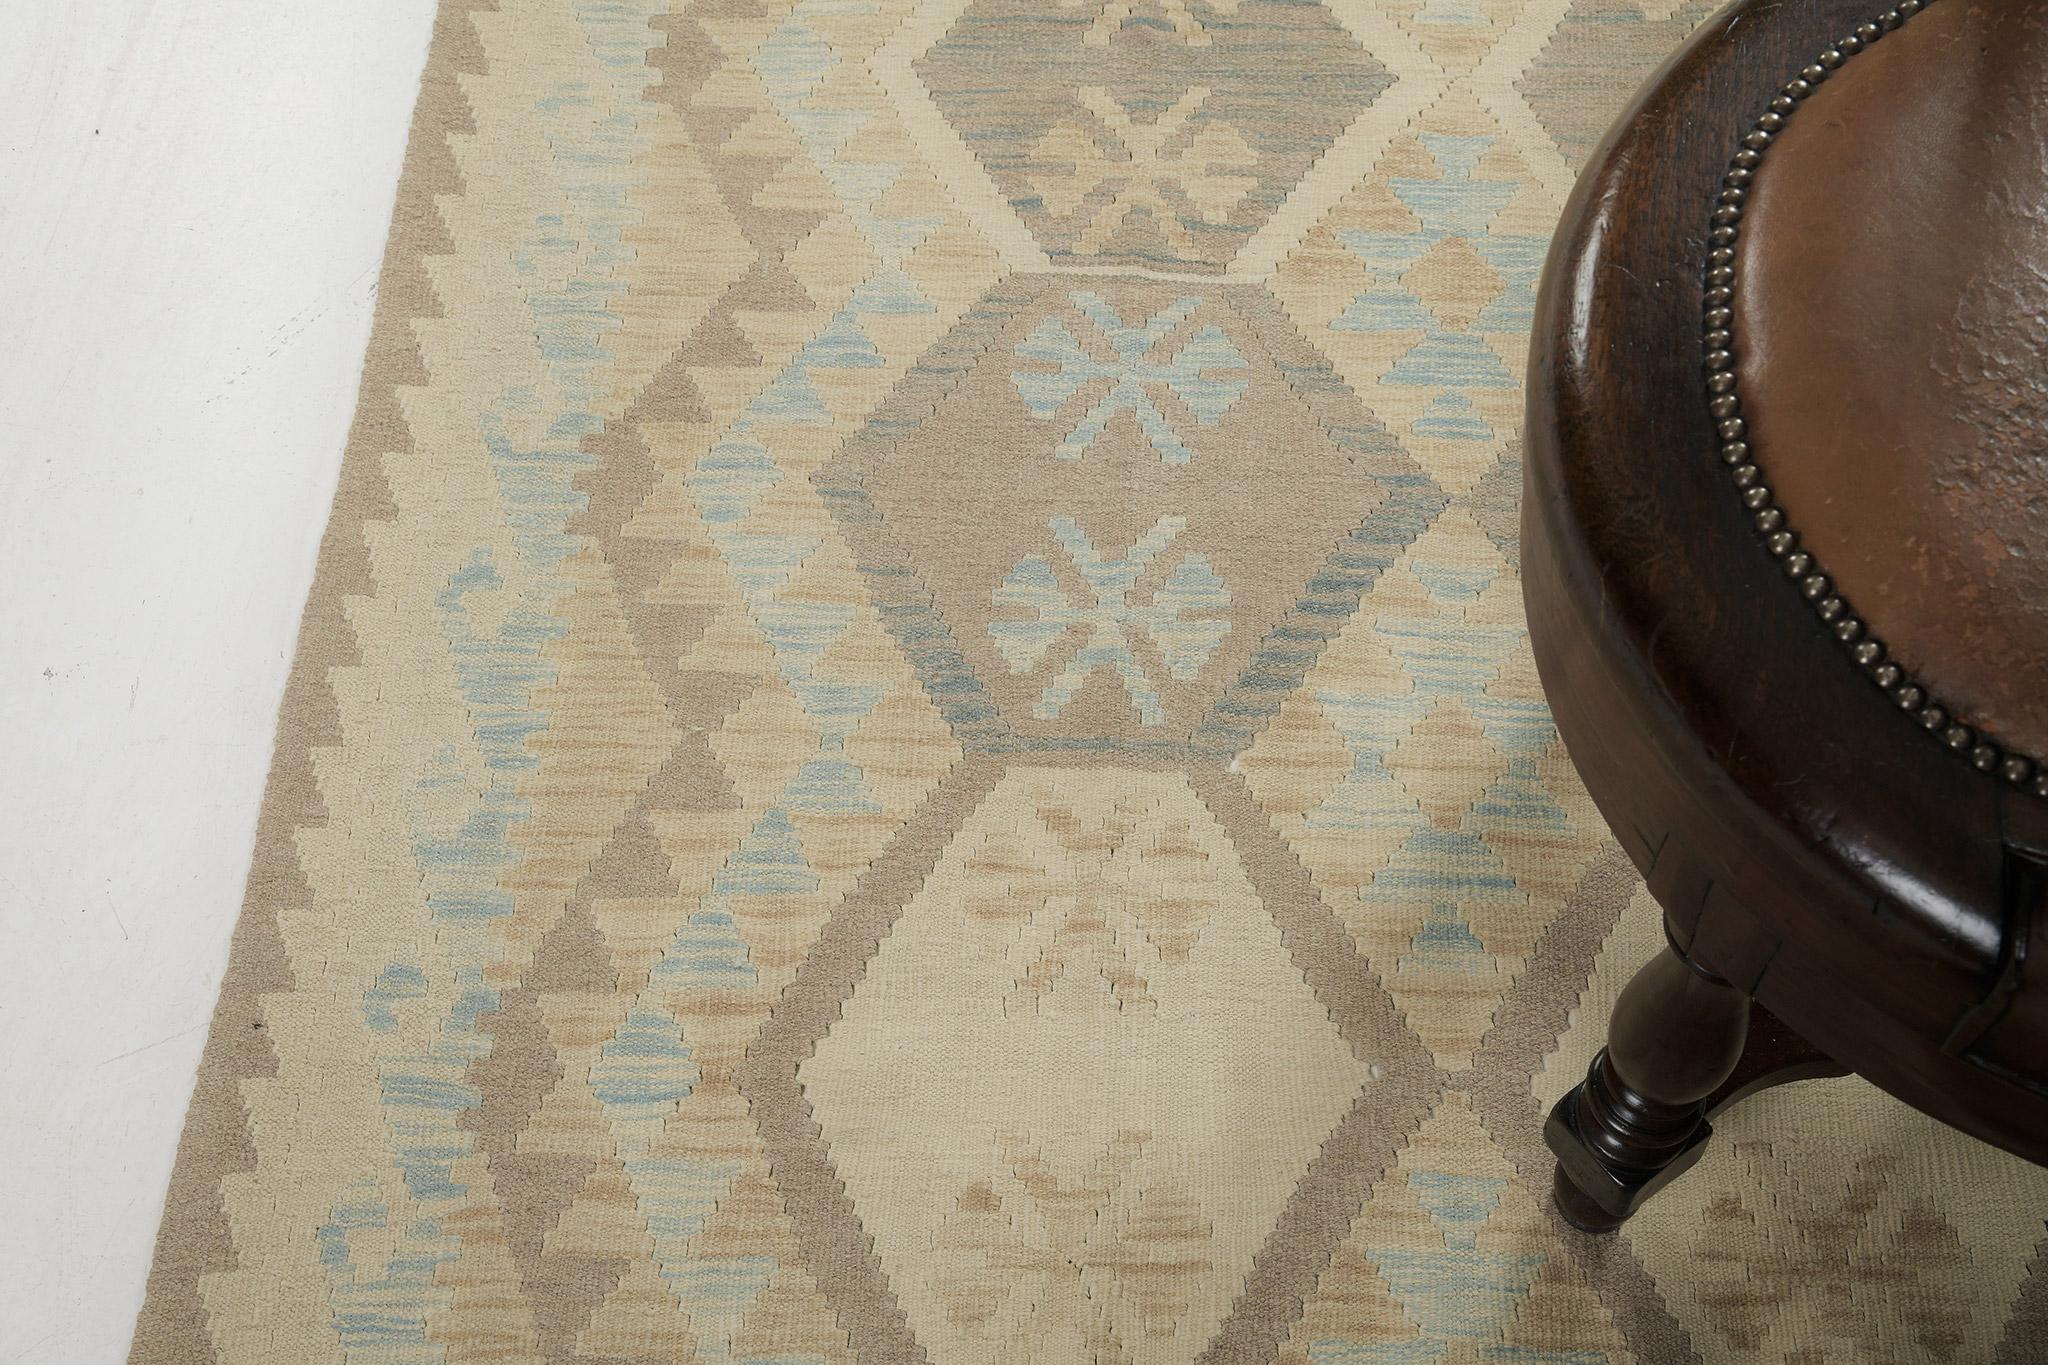 An elegant vintage-style Tribal flat weave adorned with cerulean blue geometric elements. The muted earth-hued hexagonal layouts create a simple yet interesting design for a wide variety of interiors. Its technique and creativity leave a powerful